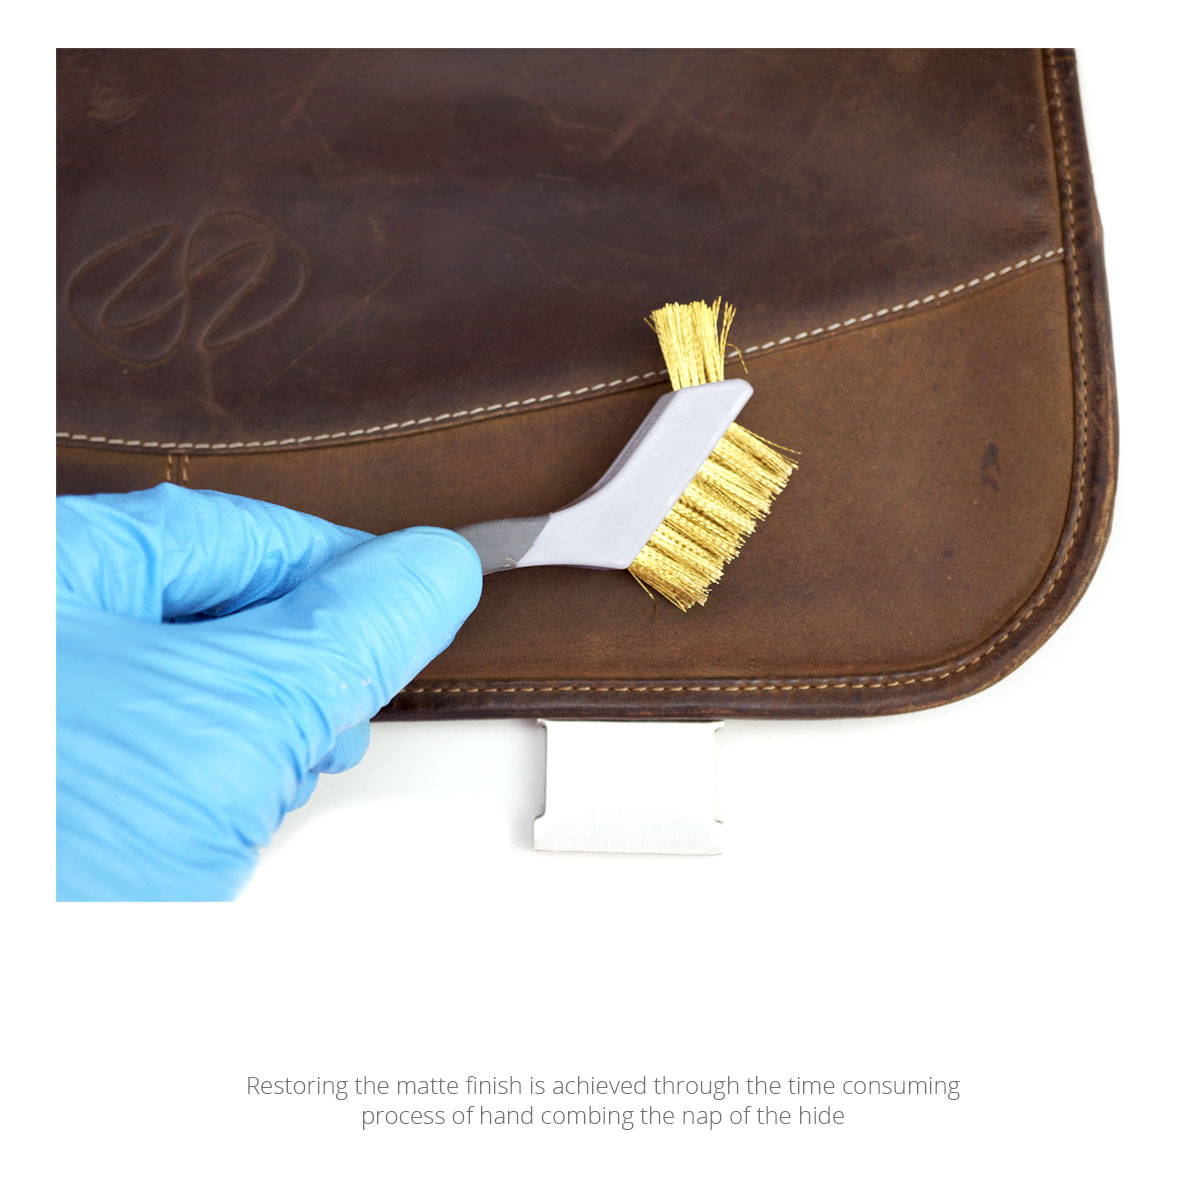 How To Restore Leather: Simple Leather Restoration Guide - Von Baer